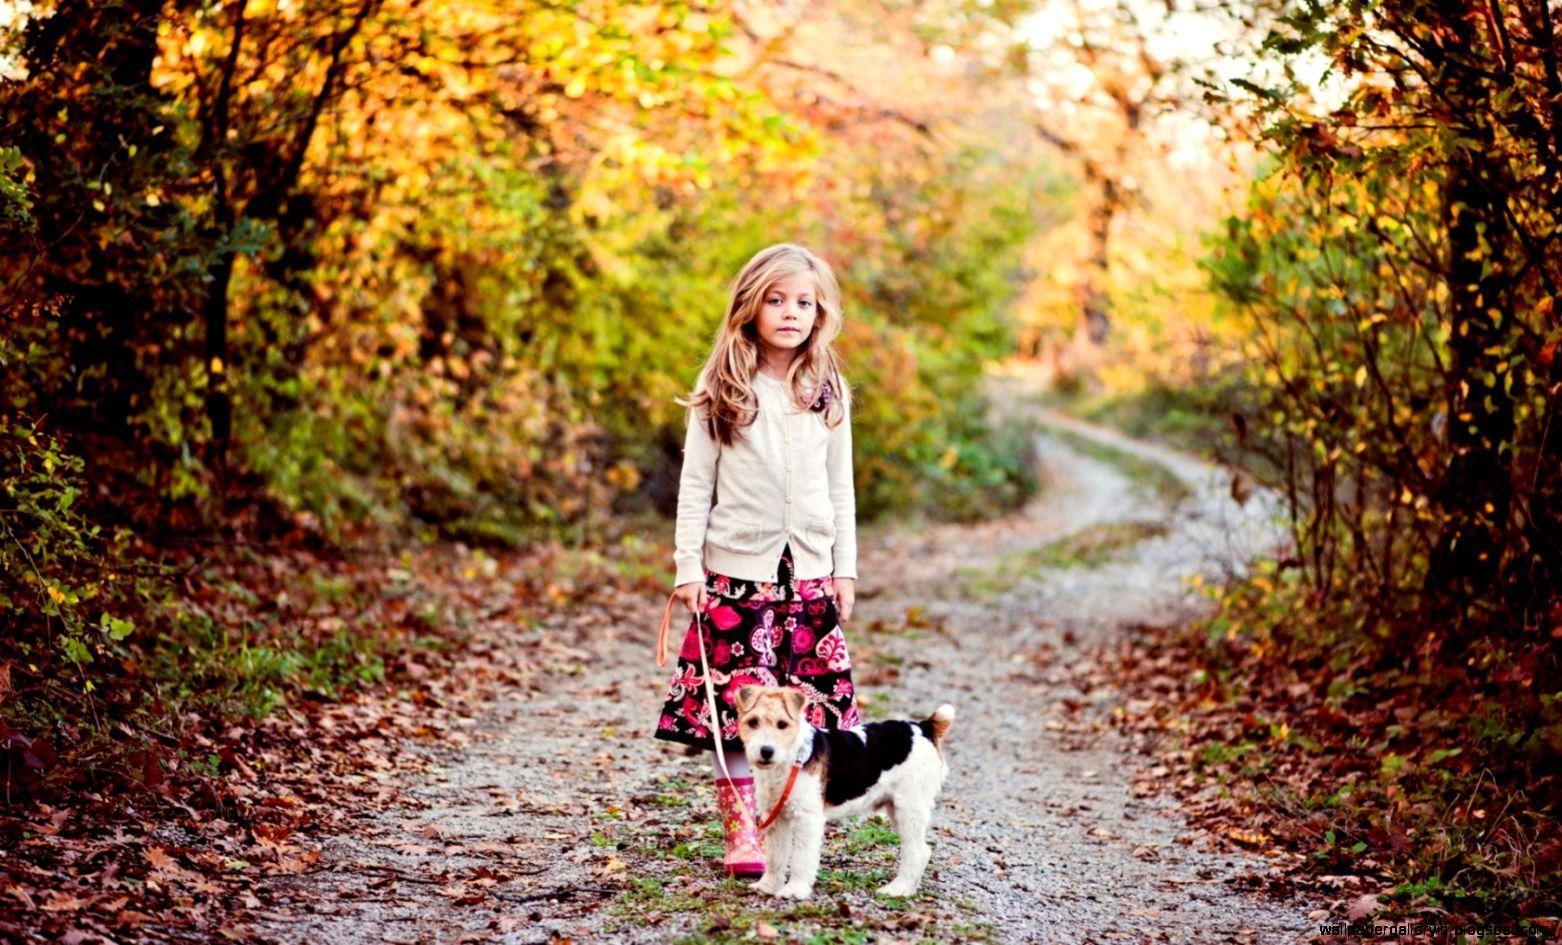 Girl In Autumn Wallpaper Kids. Dogs and kids, Autumn photography, Photography wallpaper